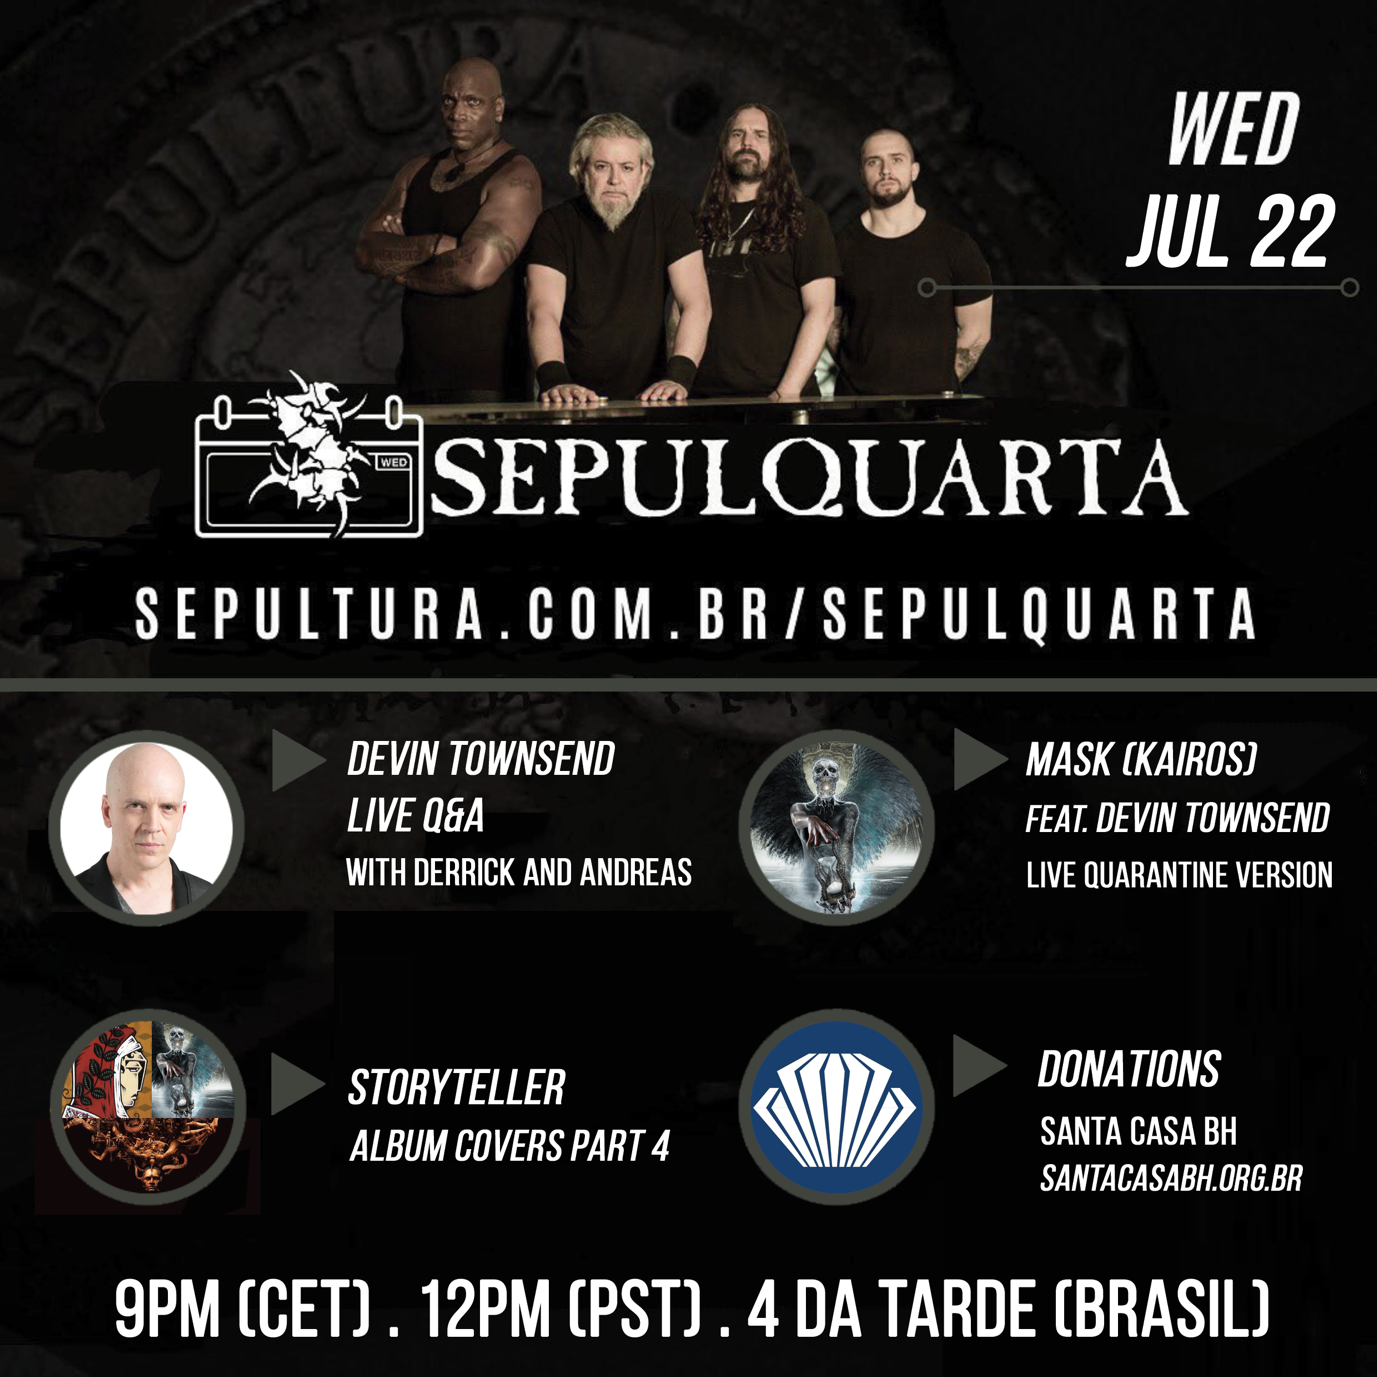 SEPULTURA - Welcome Devin Townsend To Their SepulQuarta Sessions!